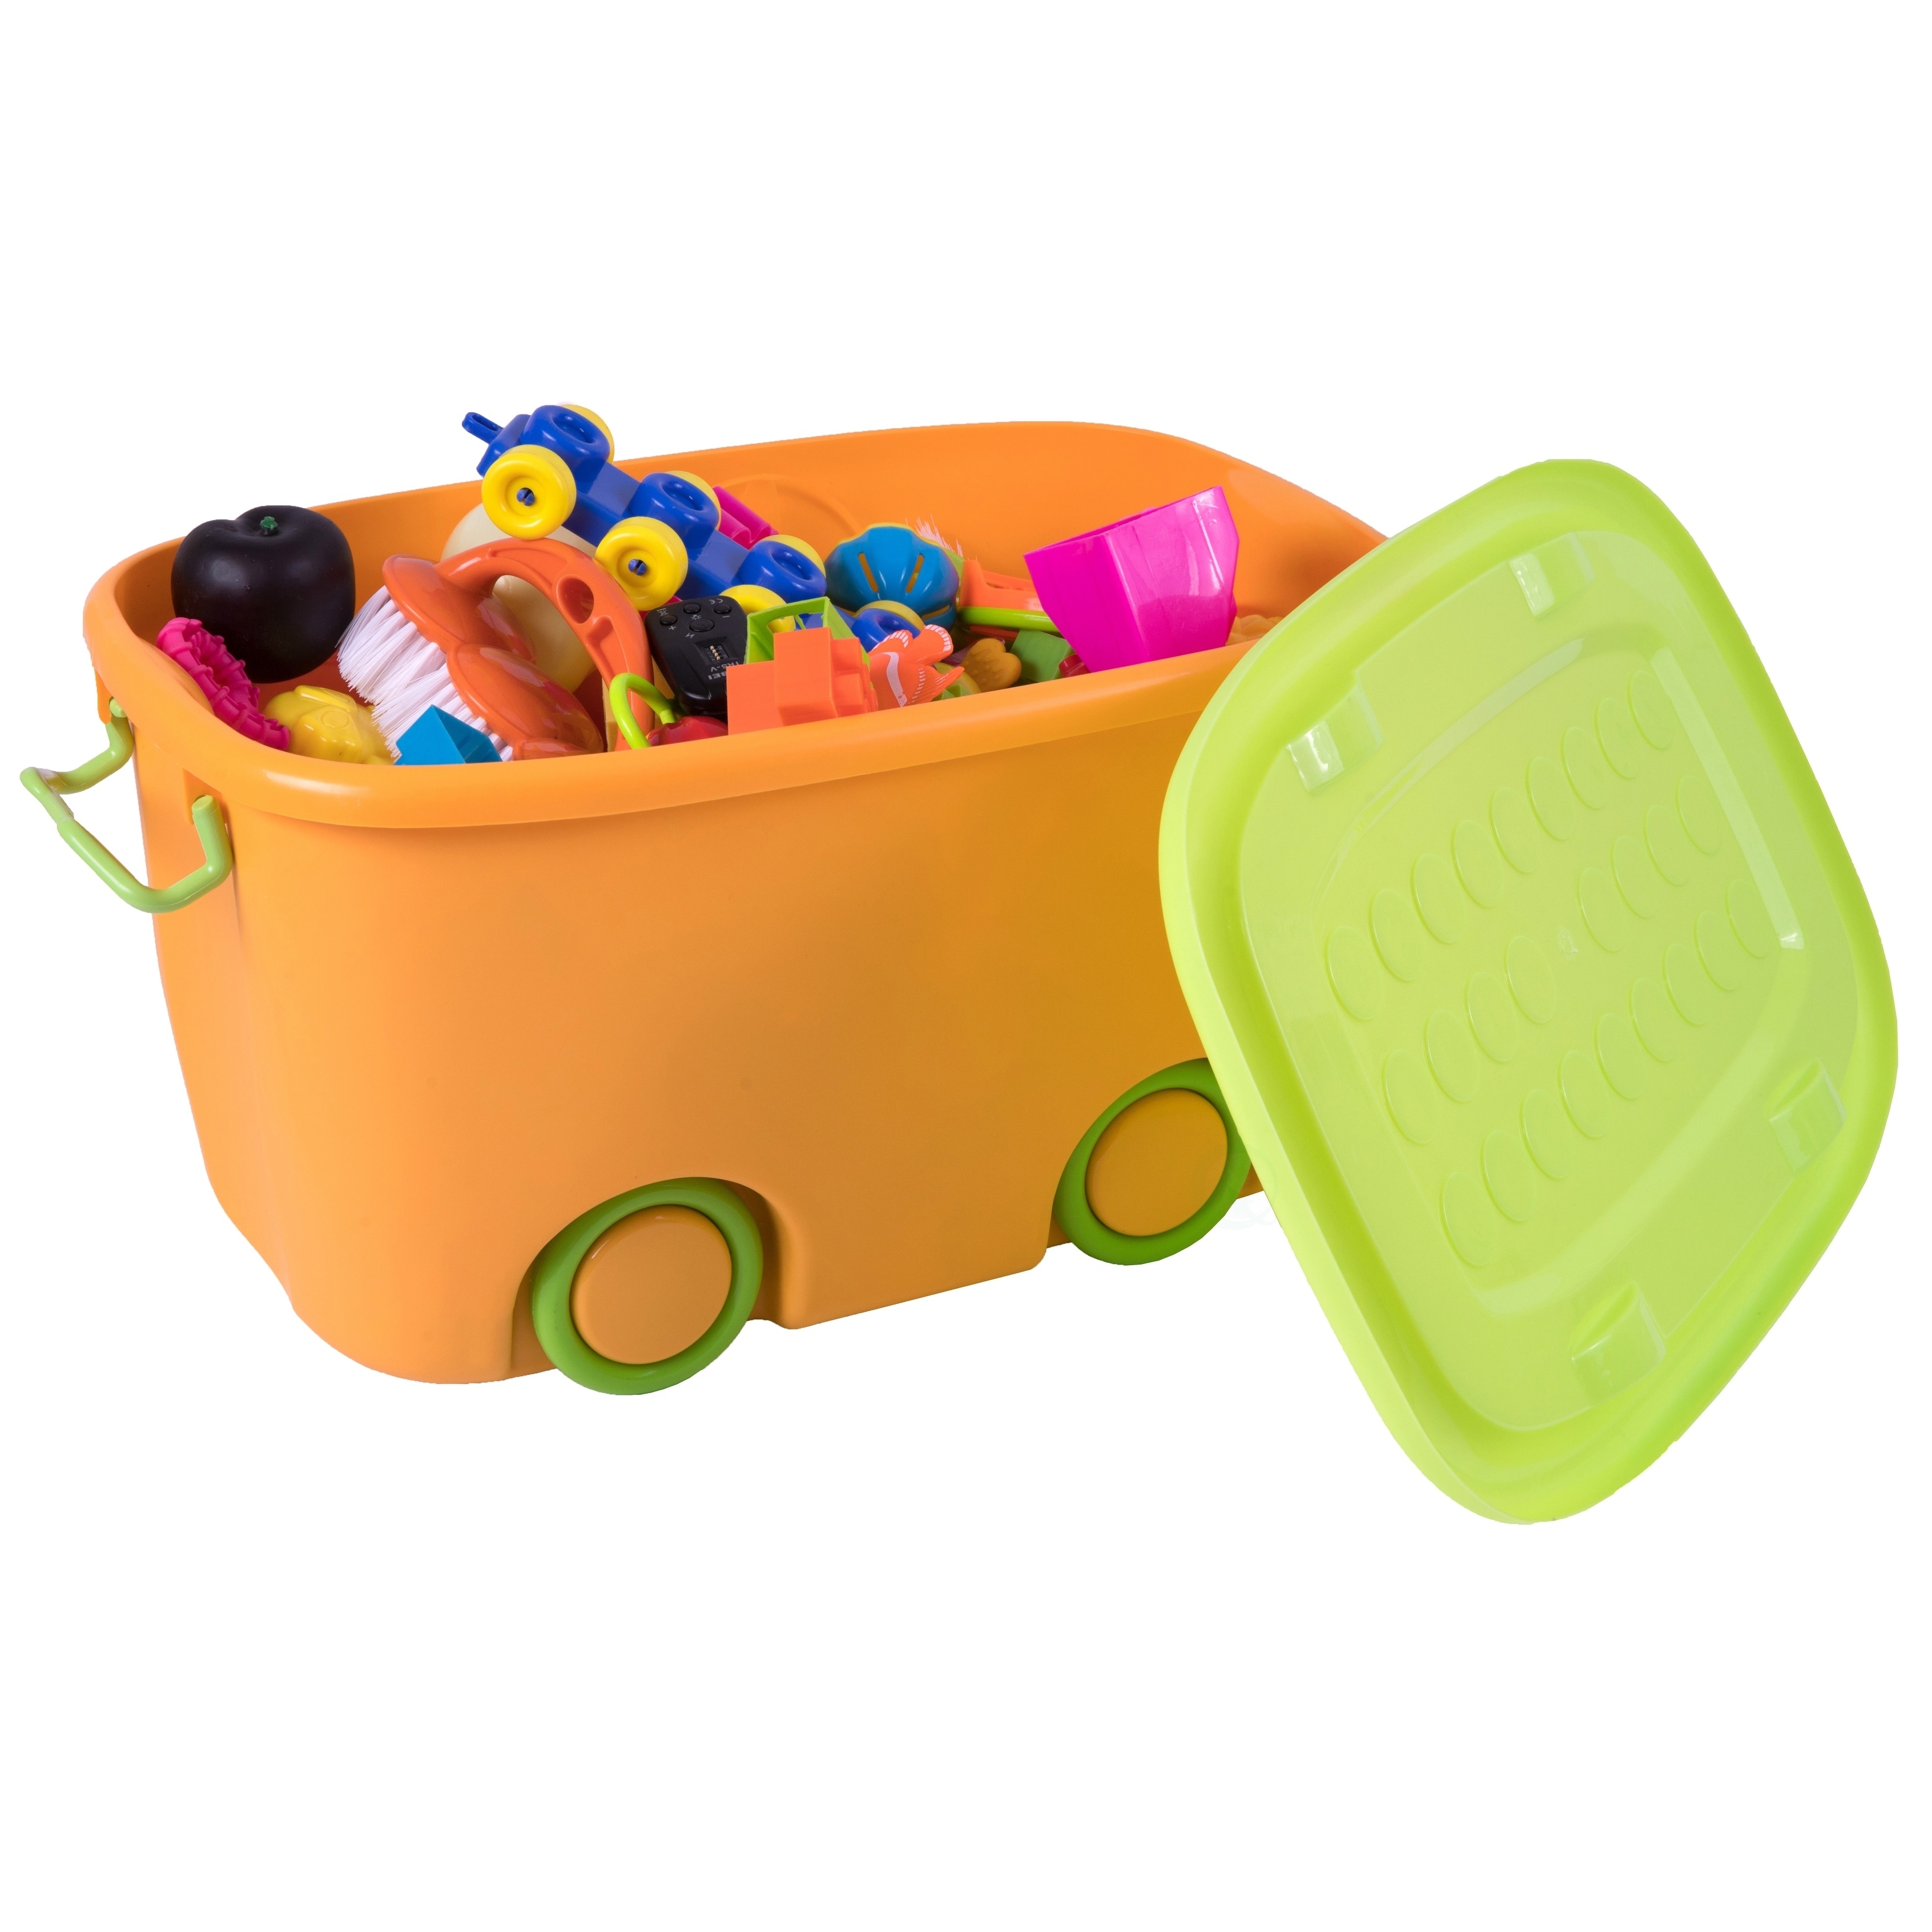 stackable bins for toys